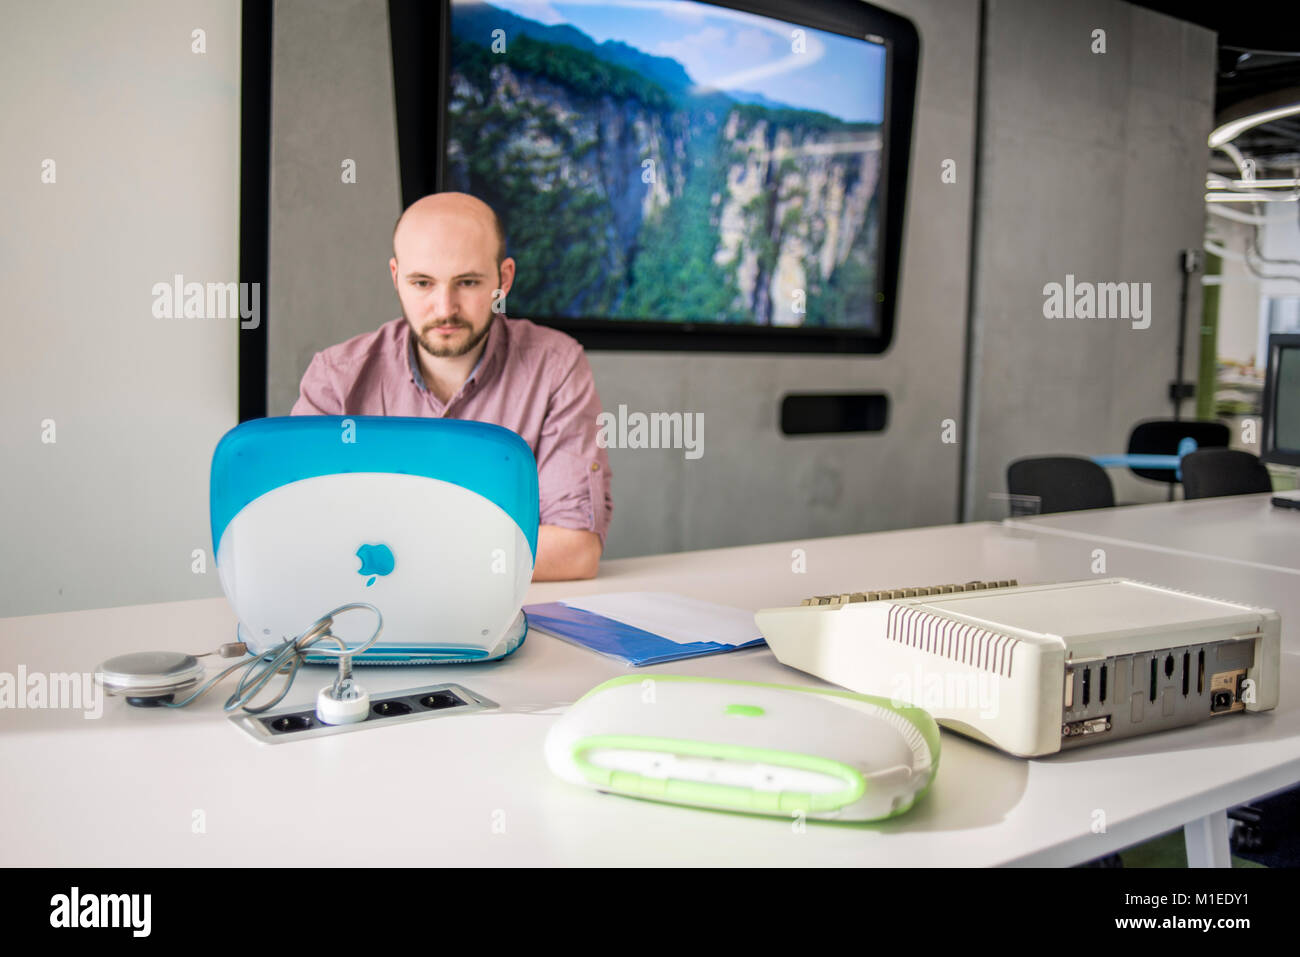 A Member Of Staff Shows Ibook G3 Release Date May 01 With Apple Stock Photo Alamy